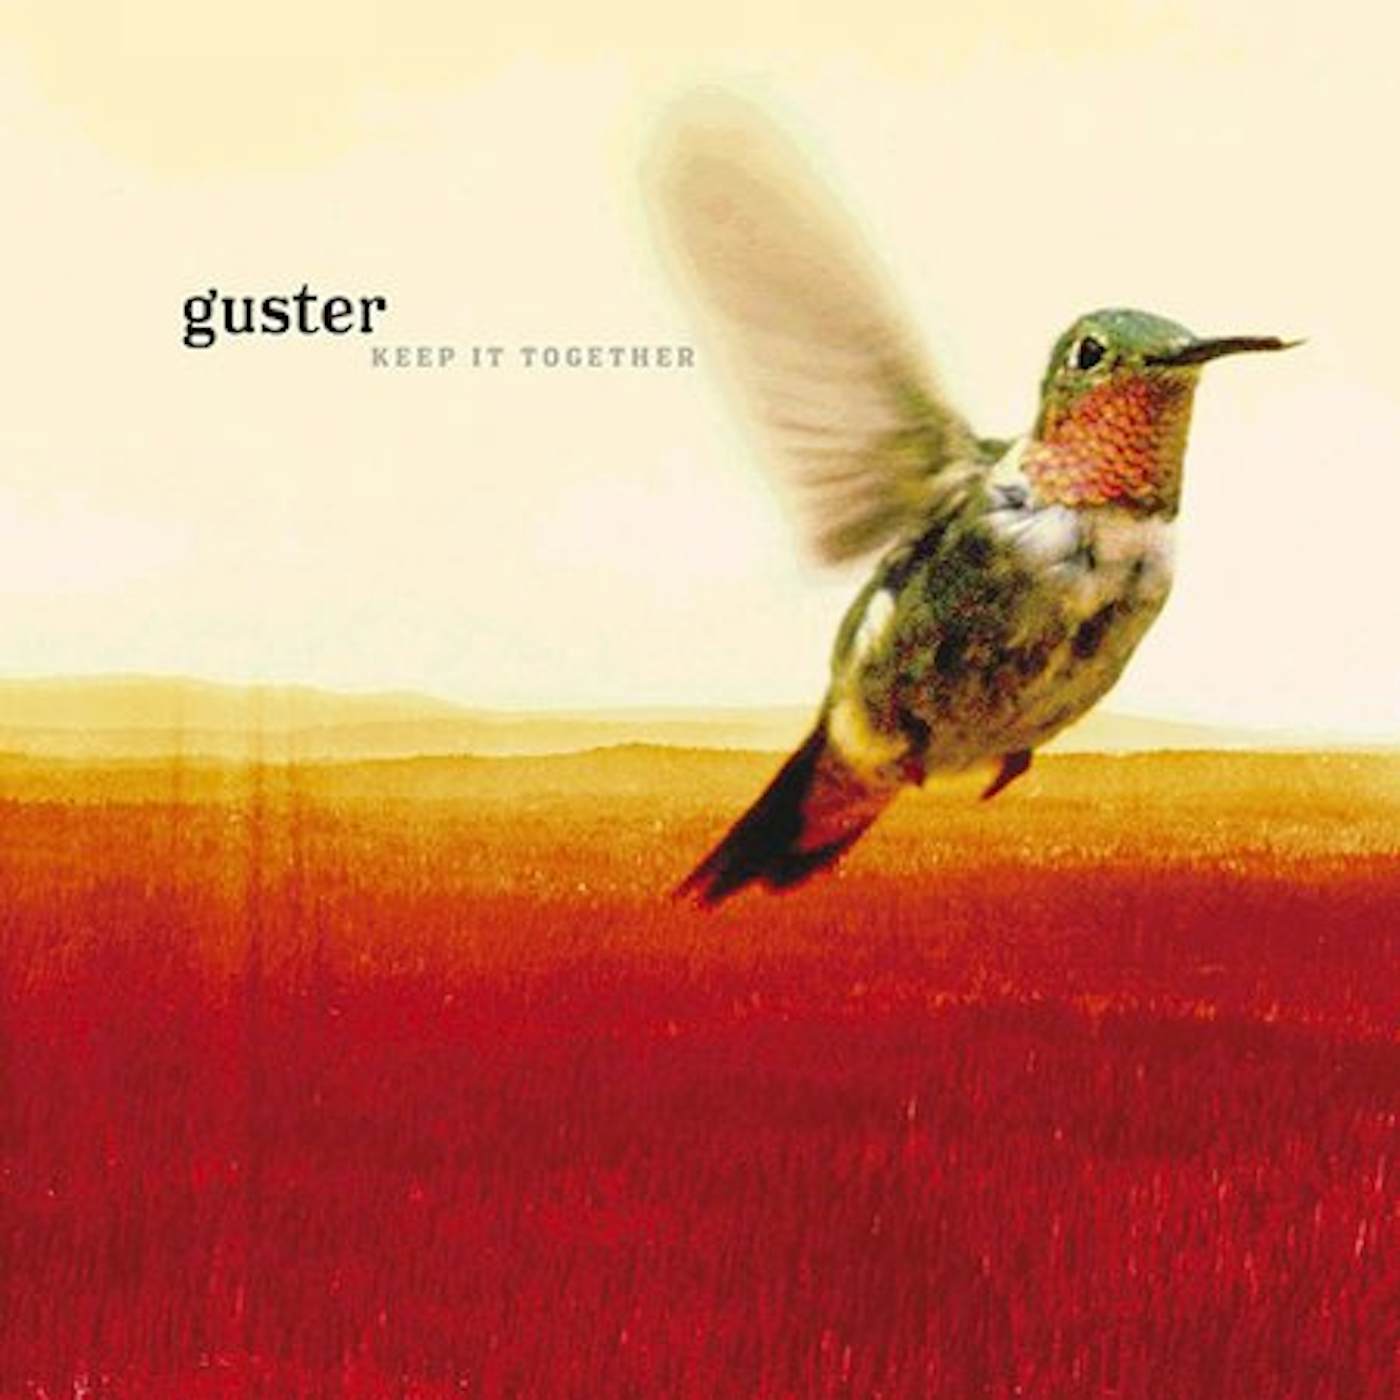 Guster KEEP IT TOGETHER CD